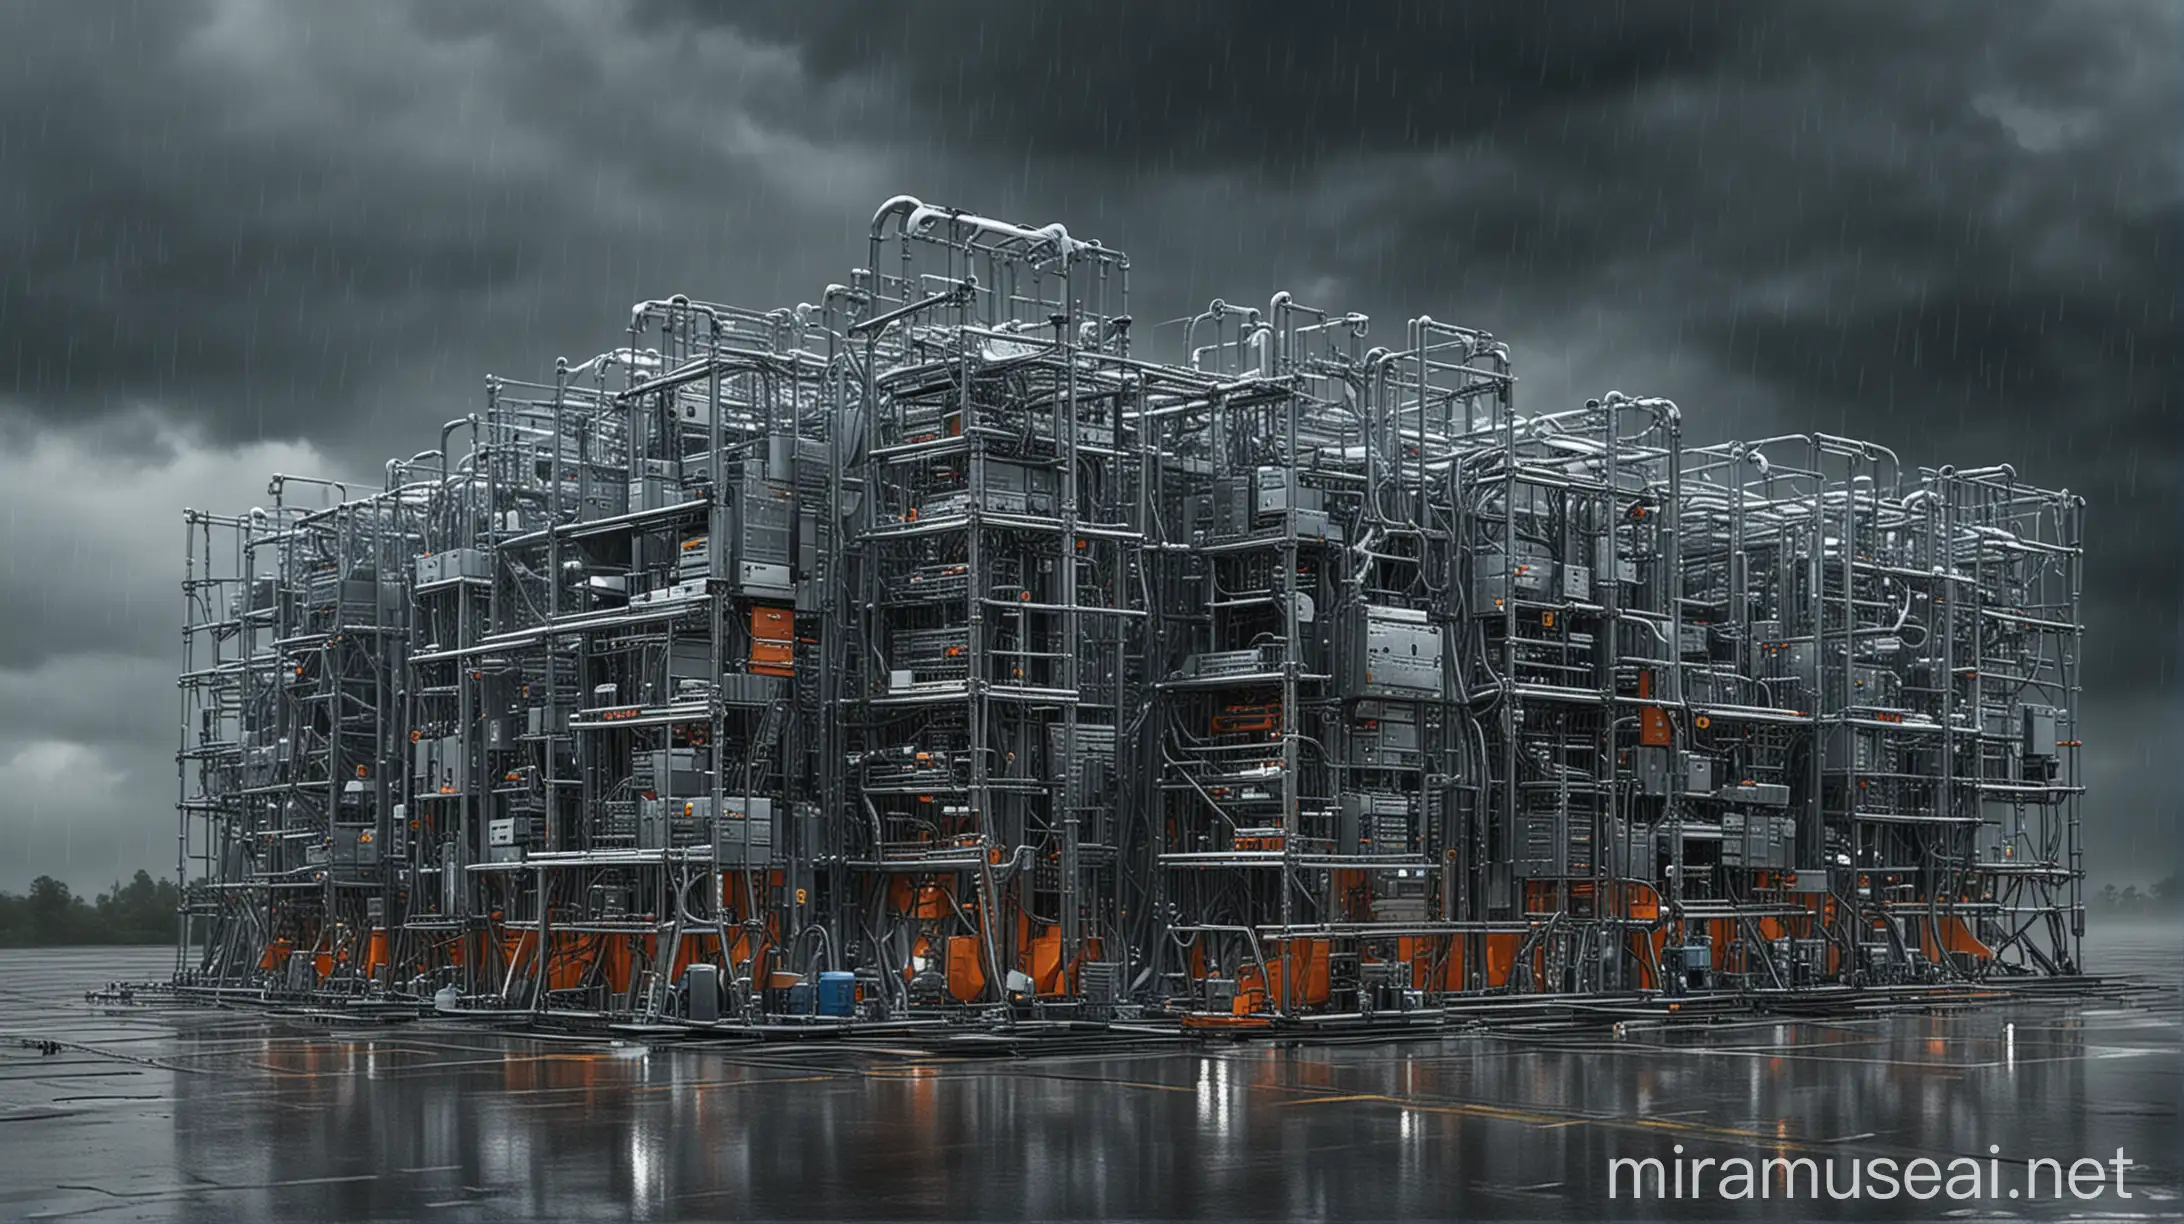 HyperV Virtual Machines in Massive Metal Structure Under Cool Rainy Sky